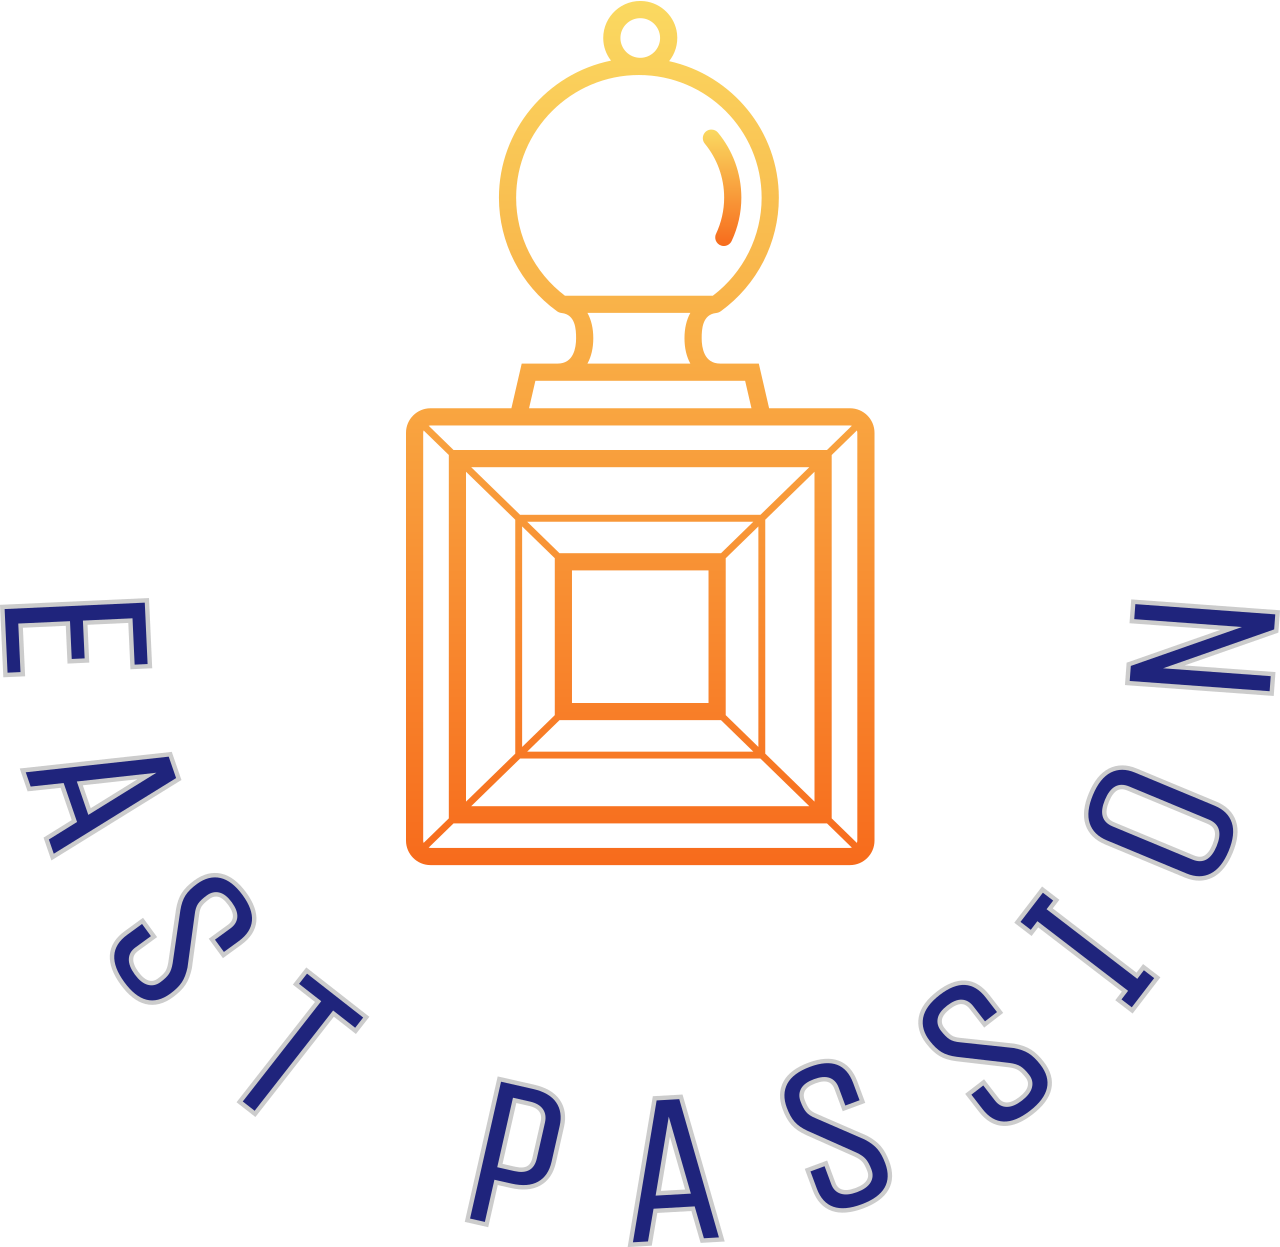 EAST PASSION's logo